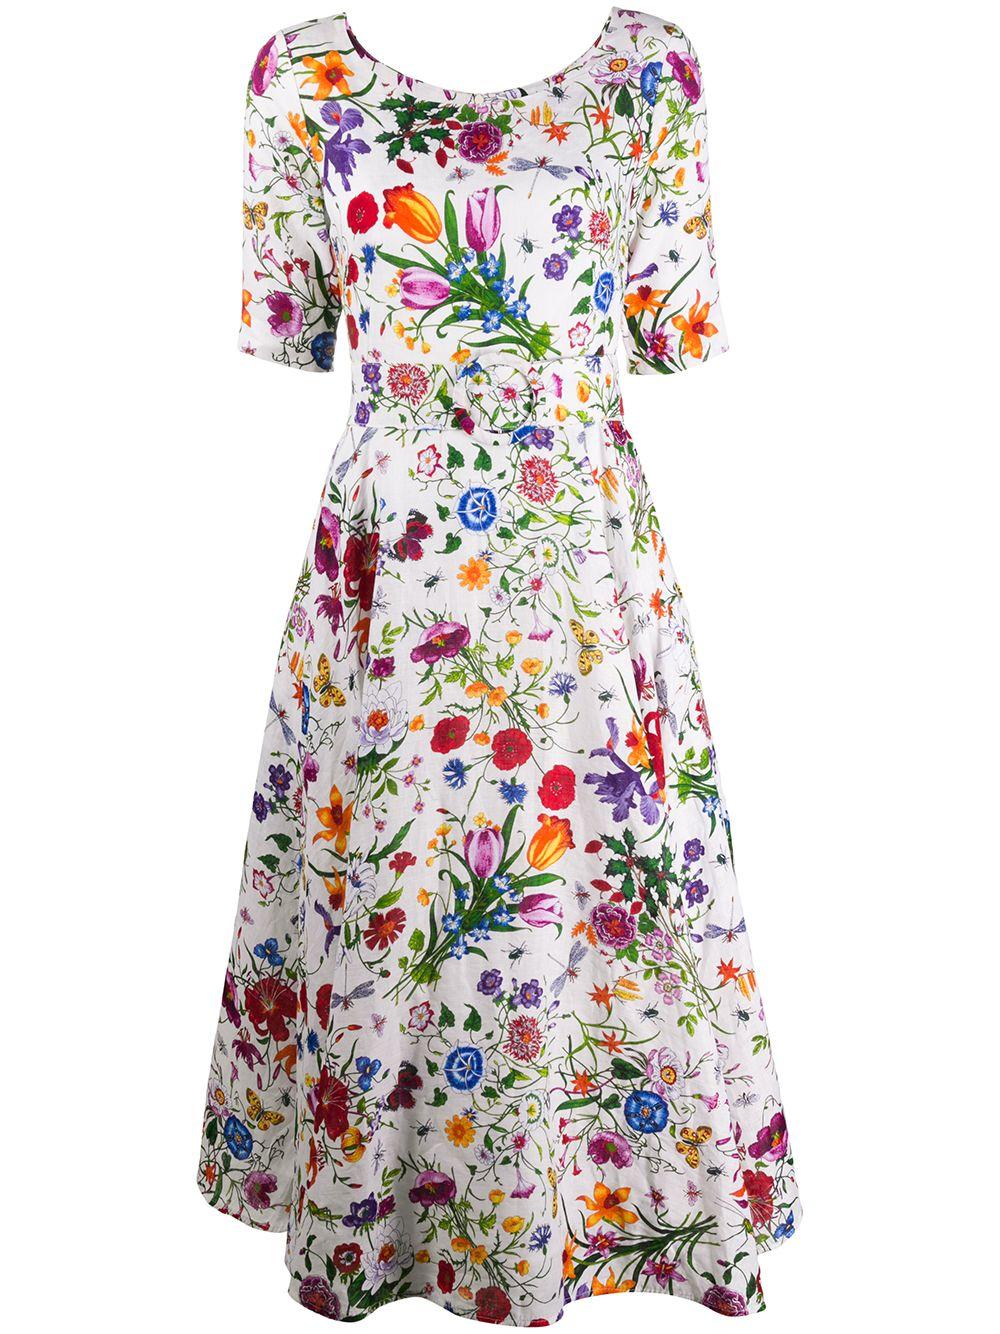 Samantha Sung Cotton Aster Floral Print Dress in White - Lyst